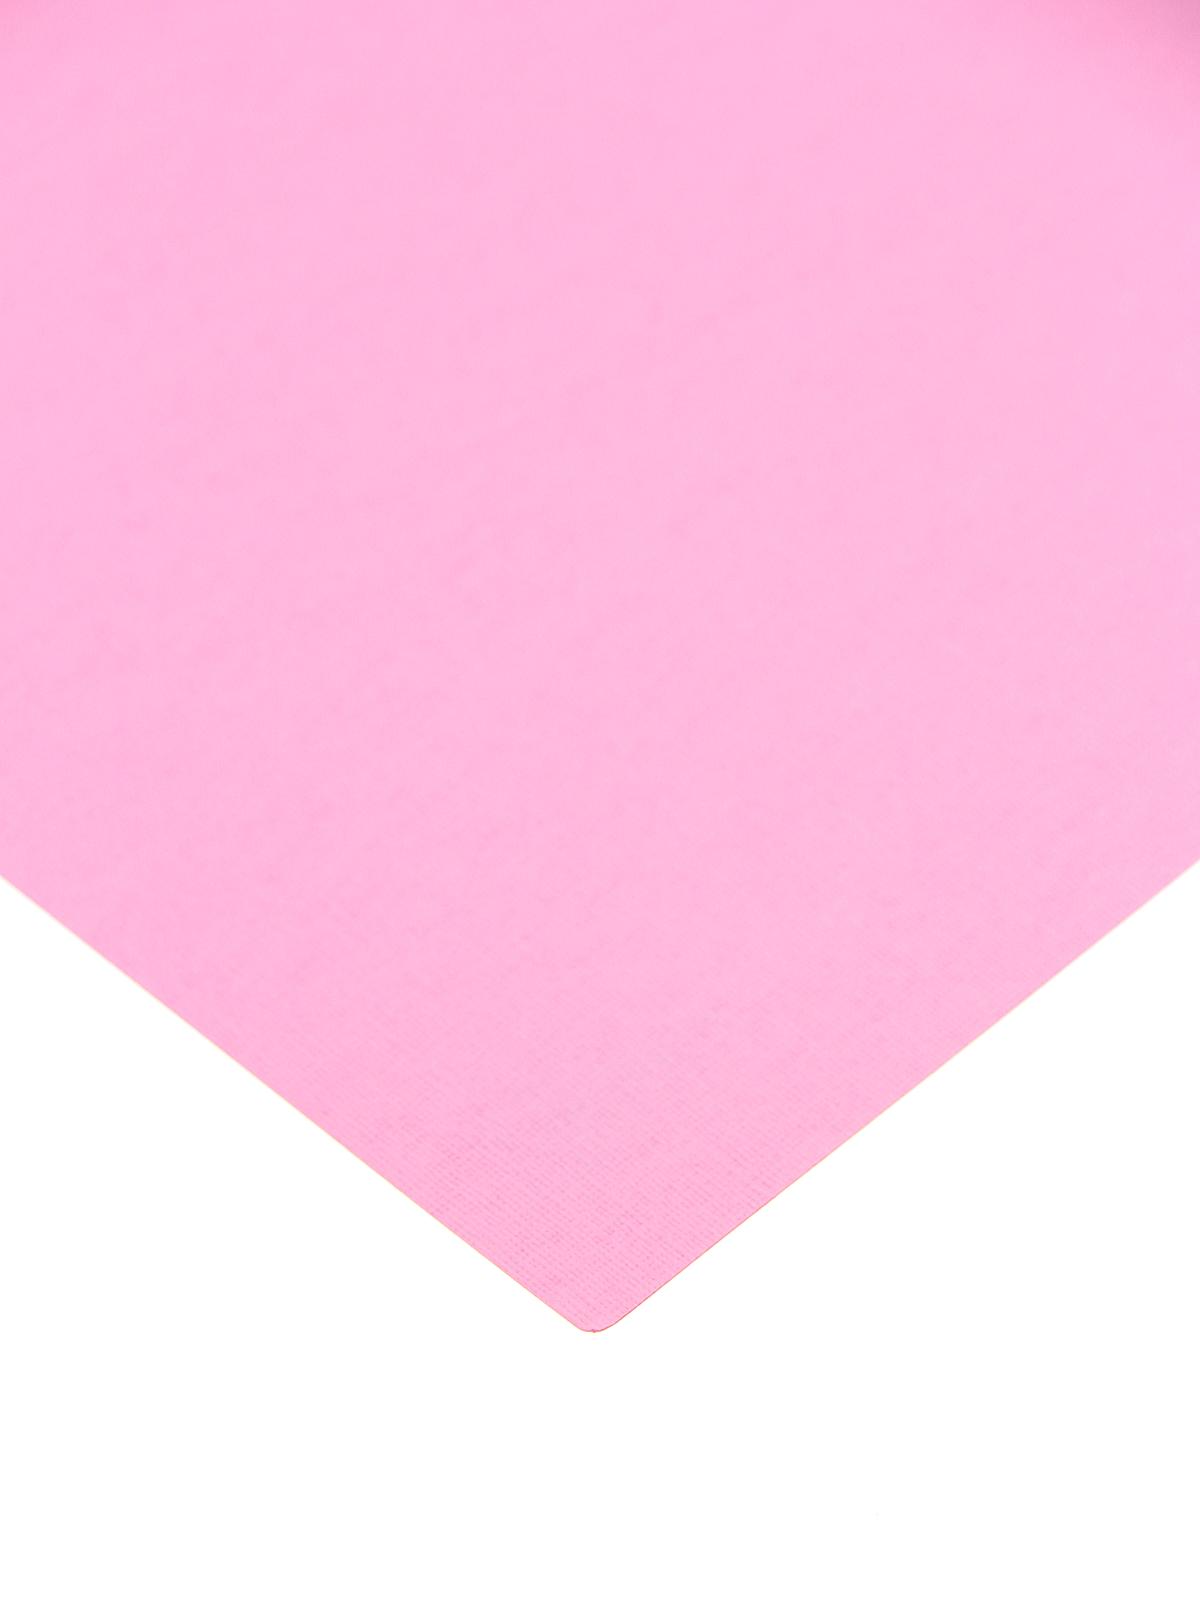 80 Lb. Canvas 12 In. X 12 In. Sheet Pink Punch